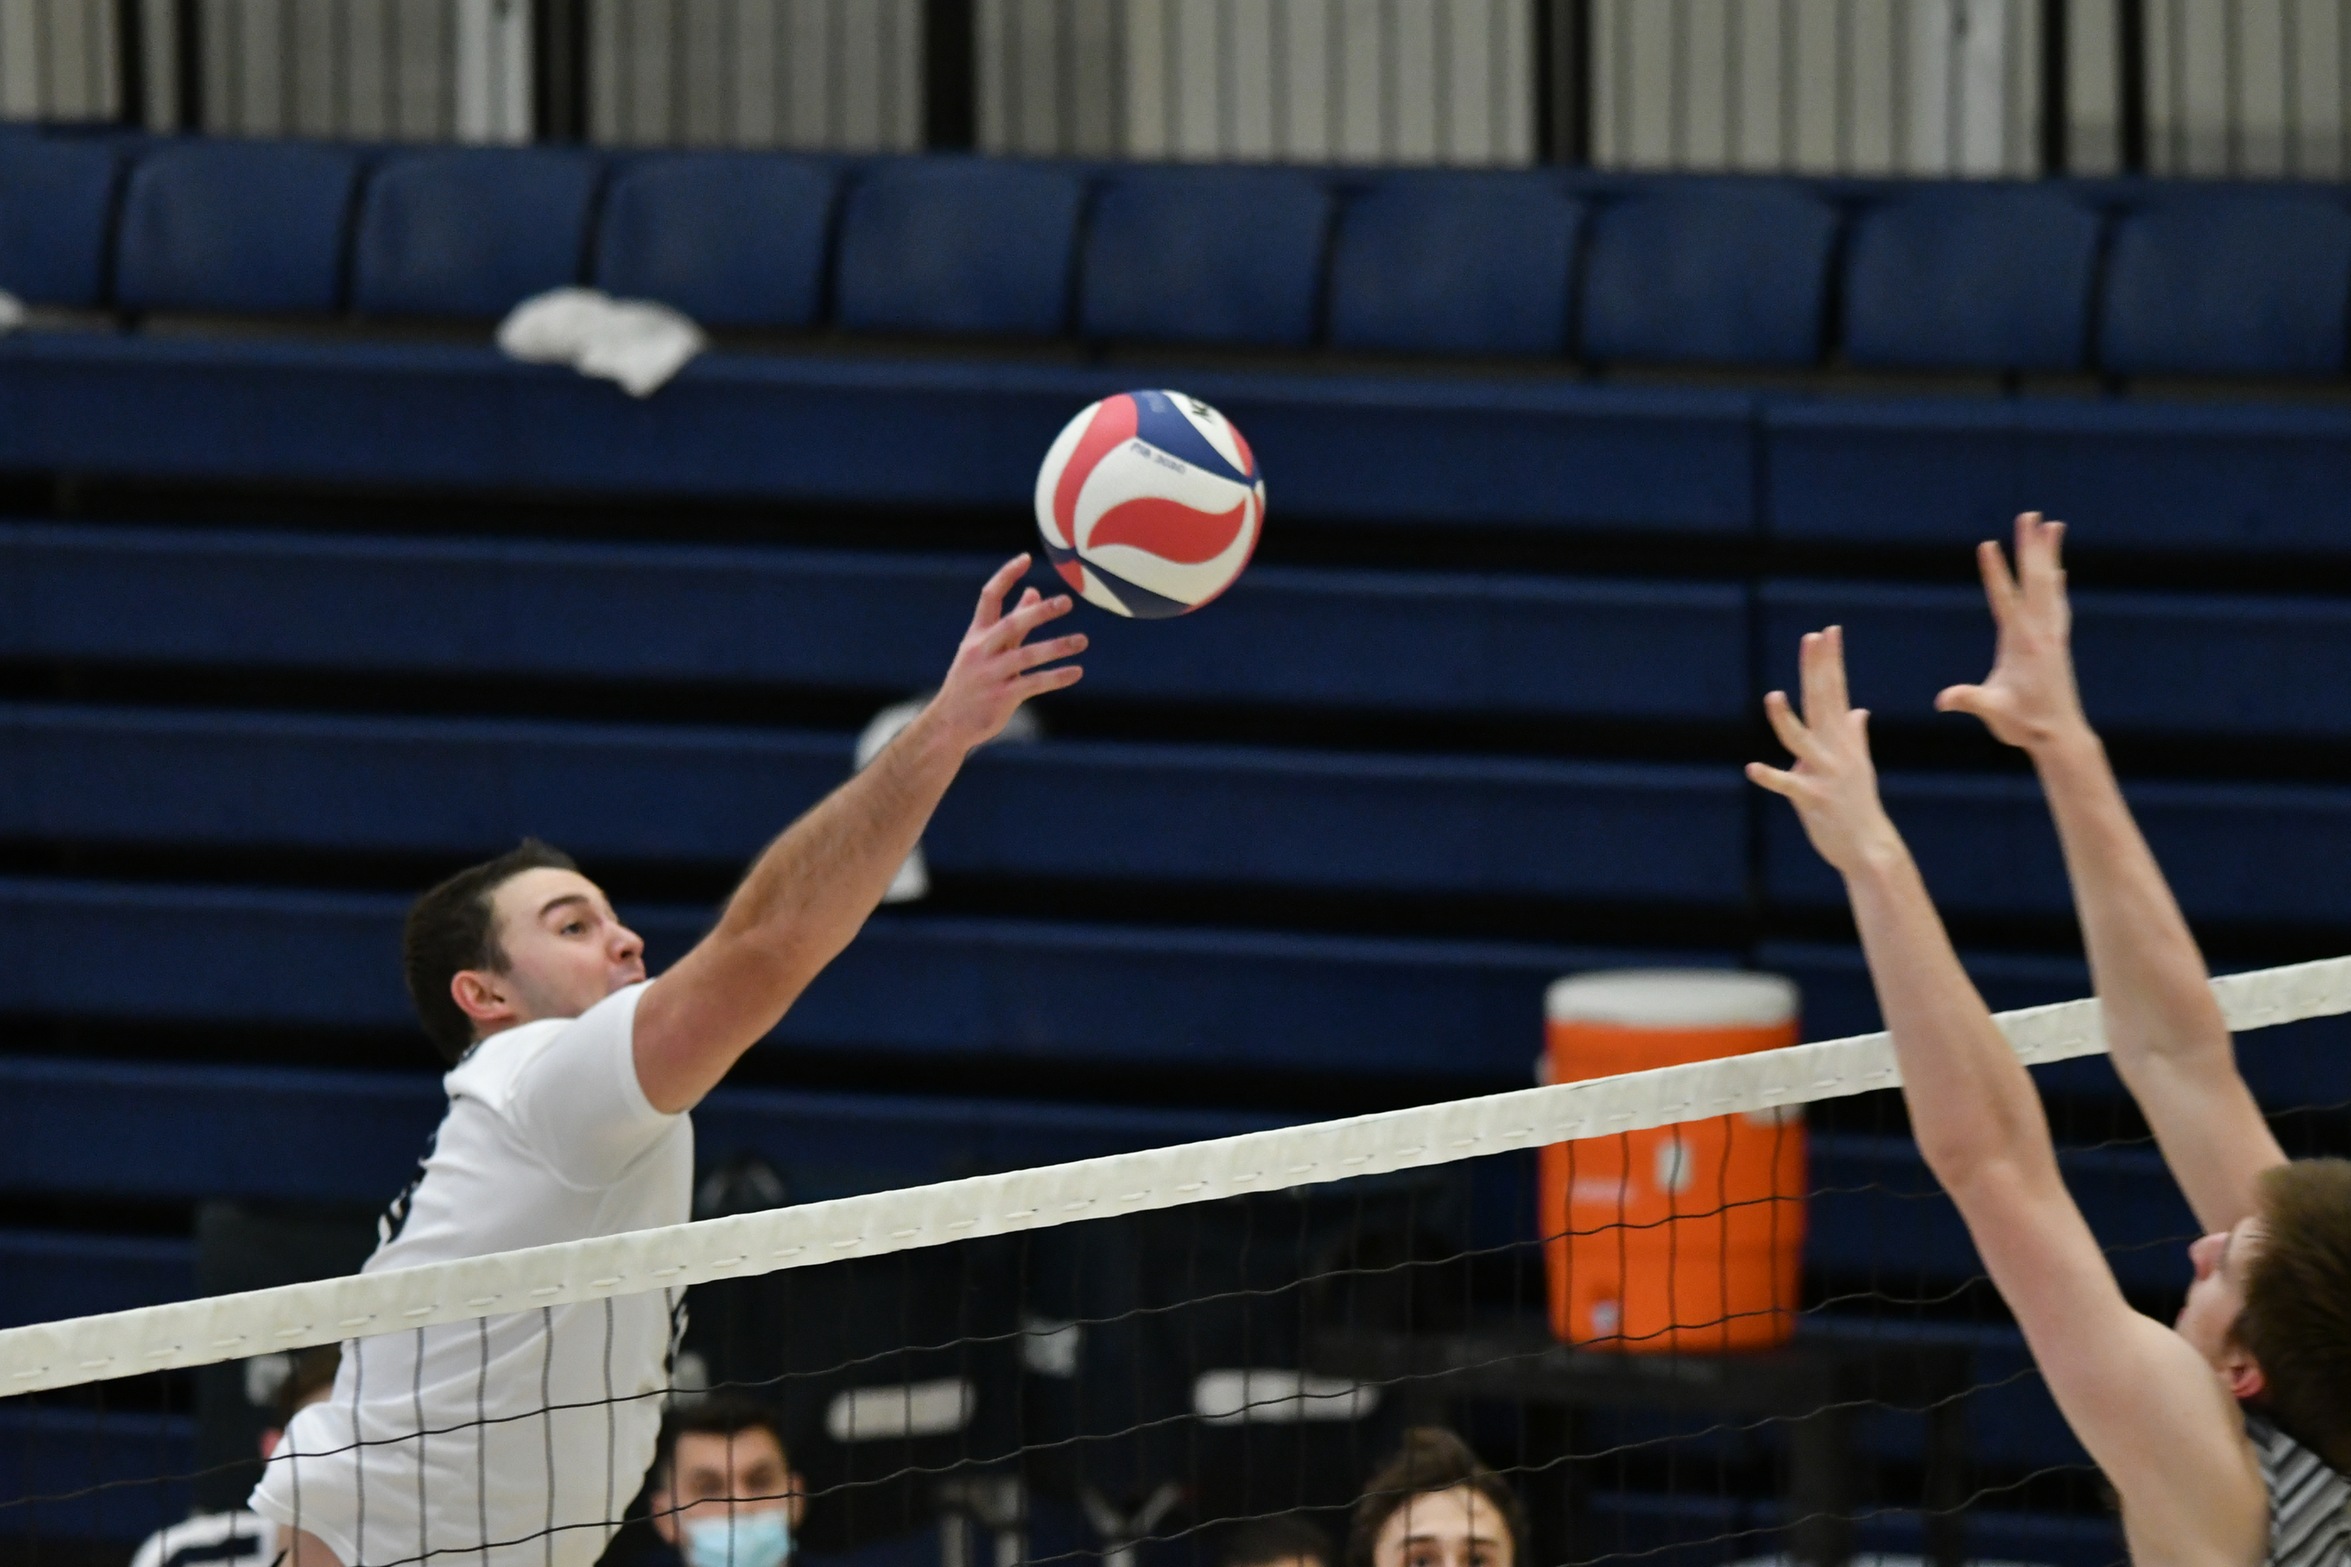 Men's Volleyball Completes Undefeated Weekend; Lions Blank Immaculata, Rosemont